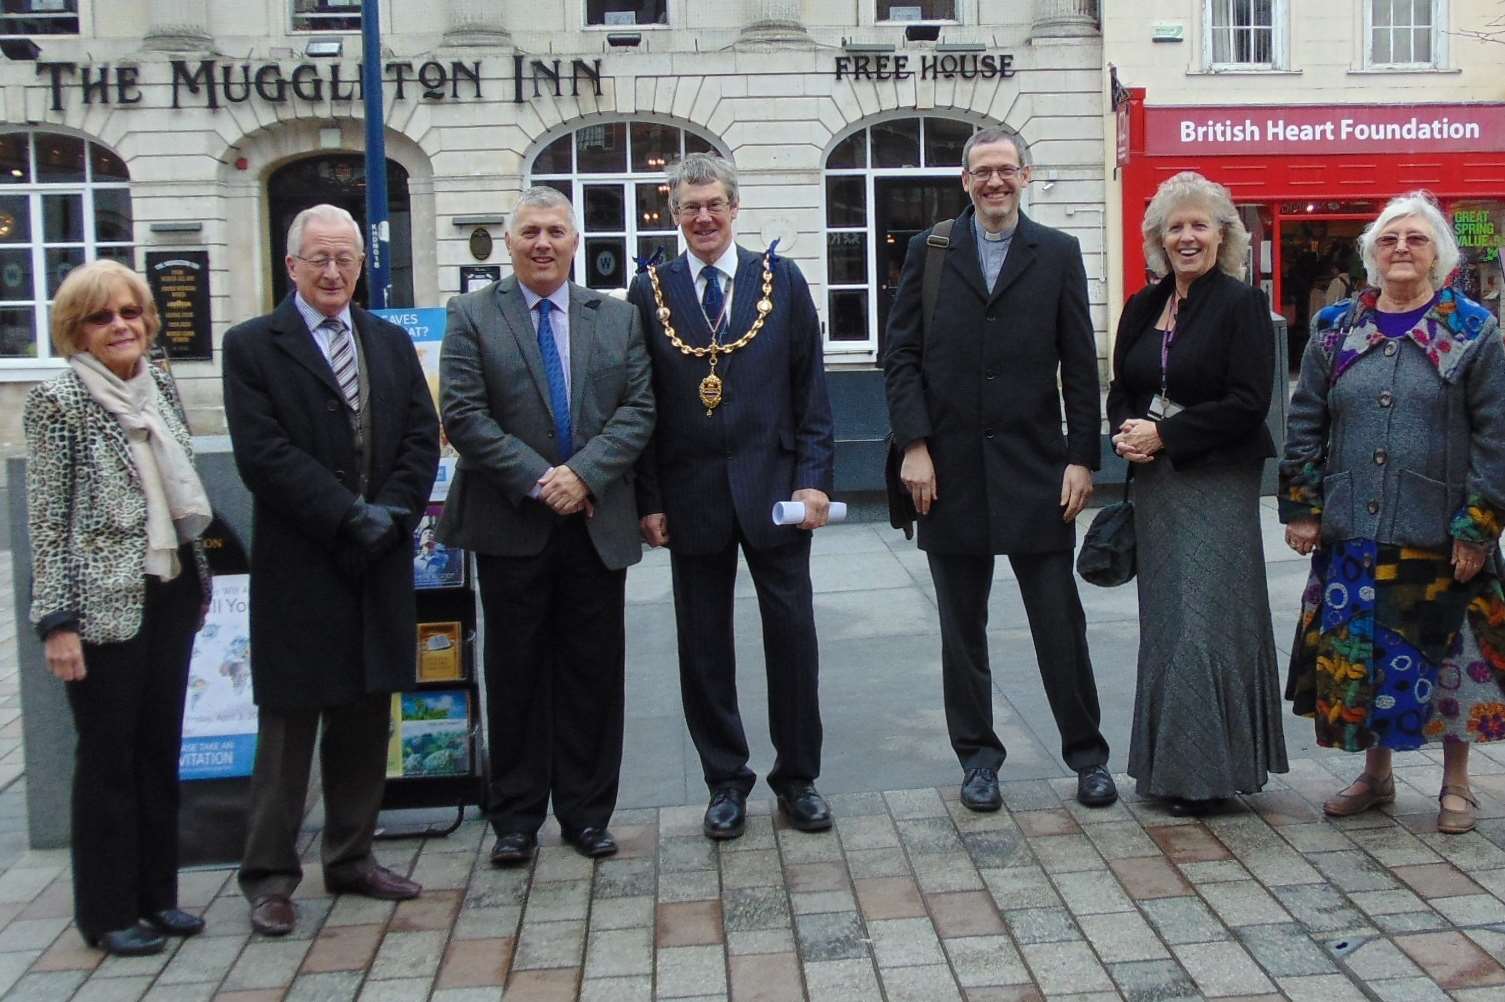 The Mayor, Cllr Richard Thick, and his guests at the flag ceremony